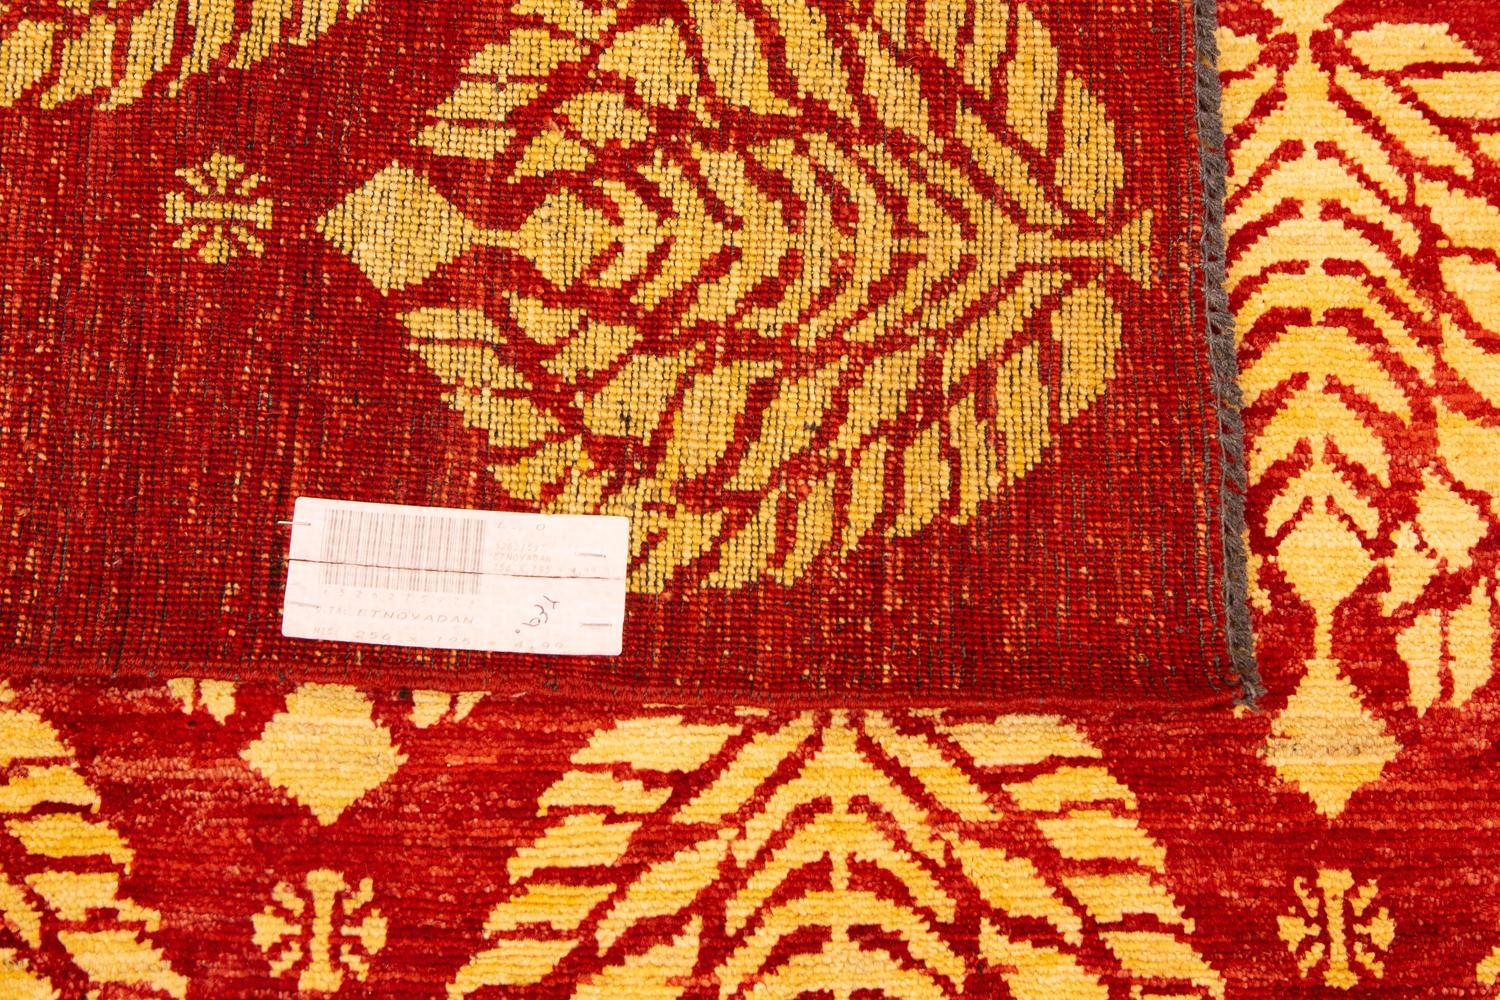 Bold Design Hand-Knotted Vintage Red Field Etno Yadan Rug, XXI Century For Sale 2